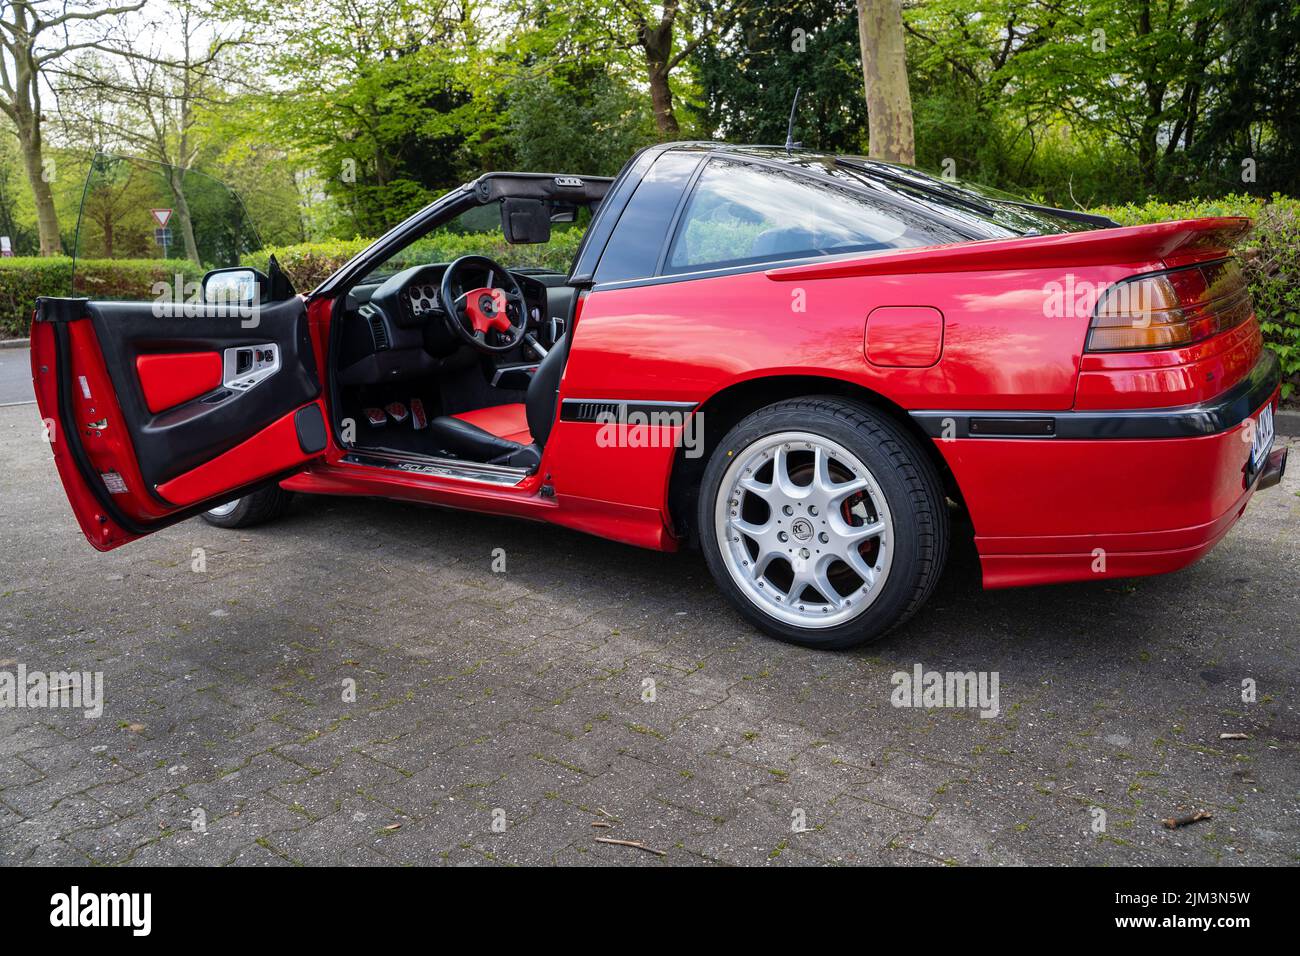 mitsubishi eclipse targa in red. It's an old car with a targa roof. Stock Photo